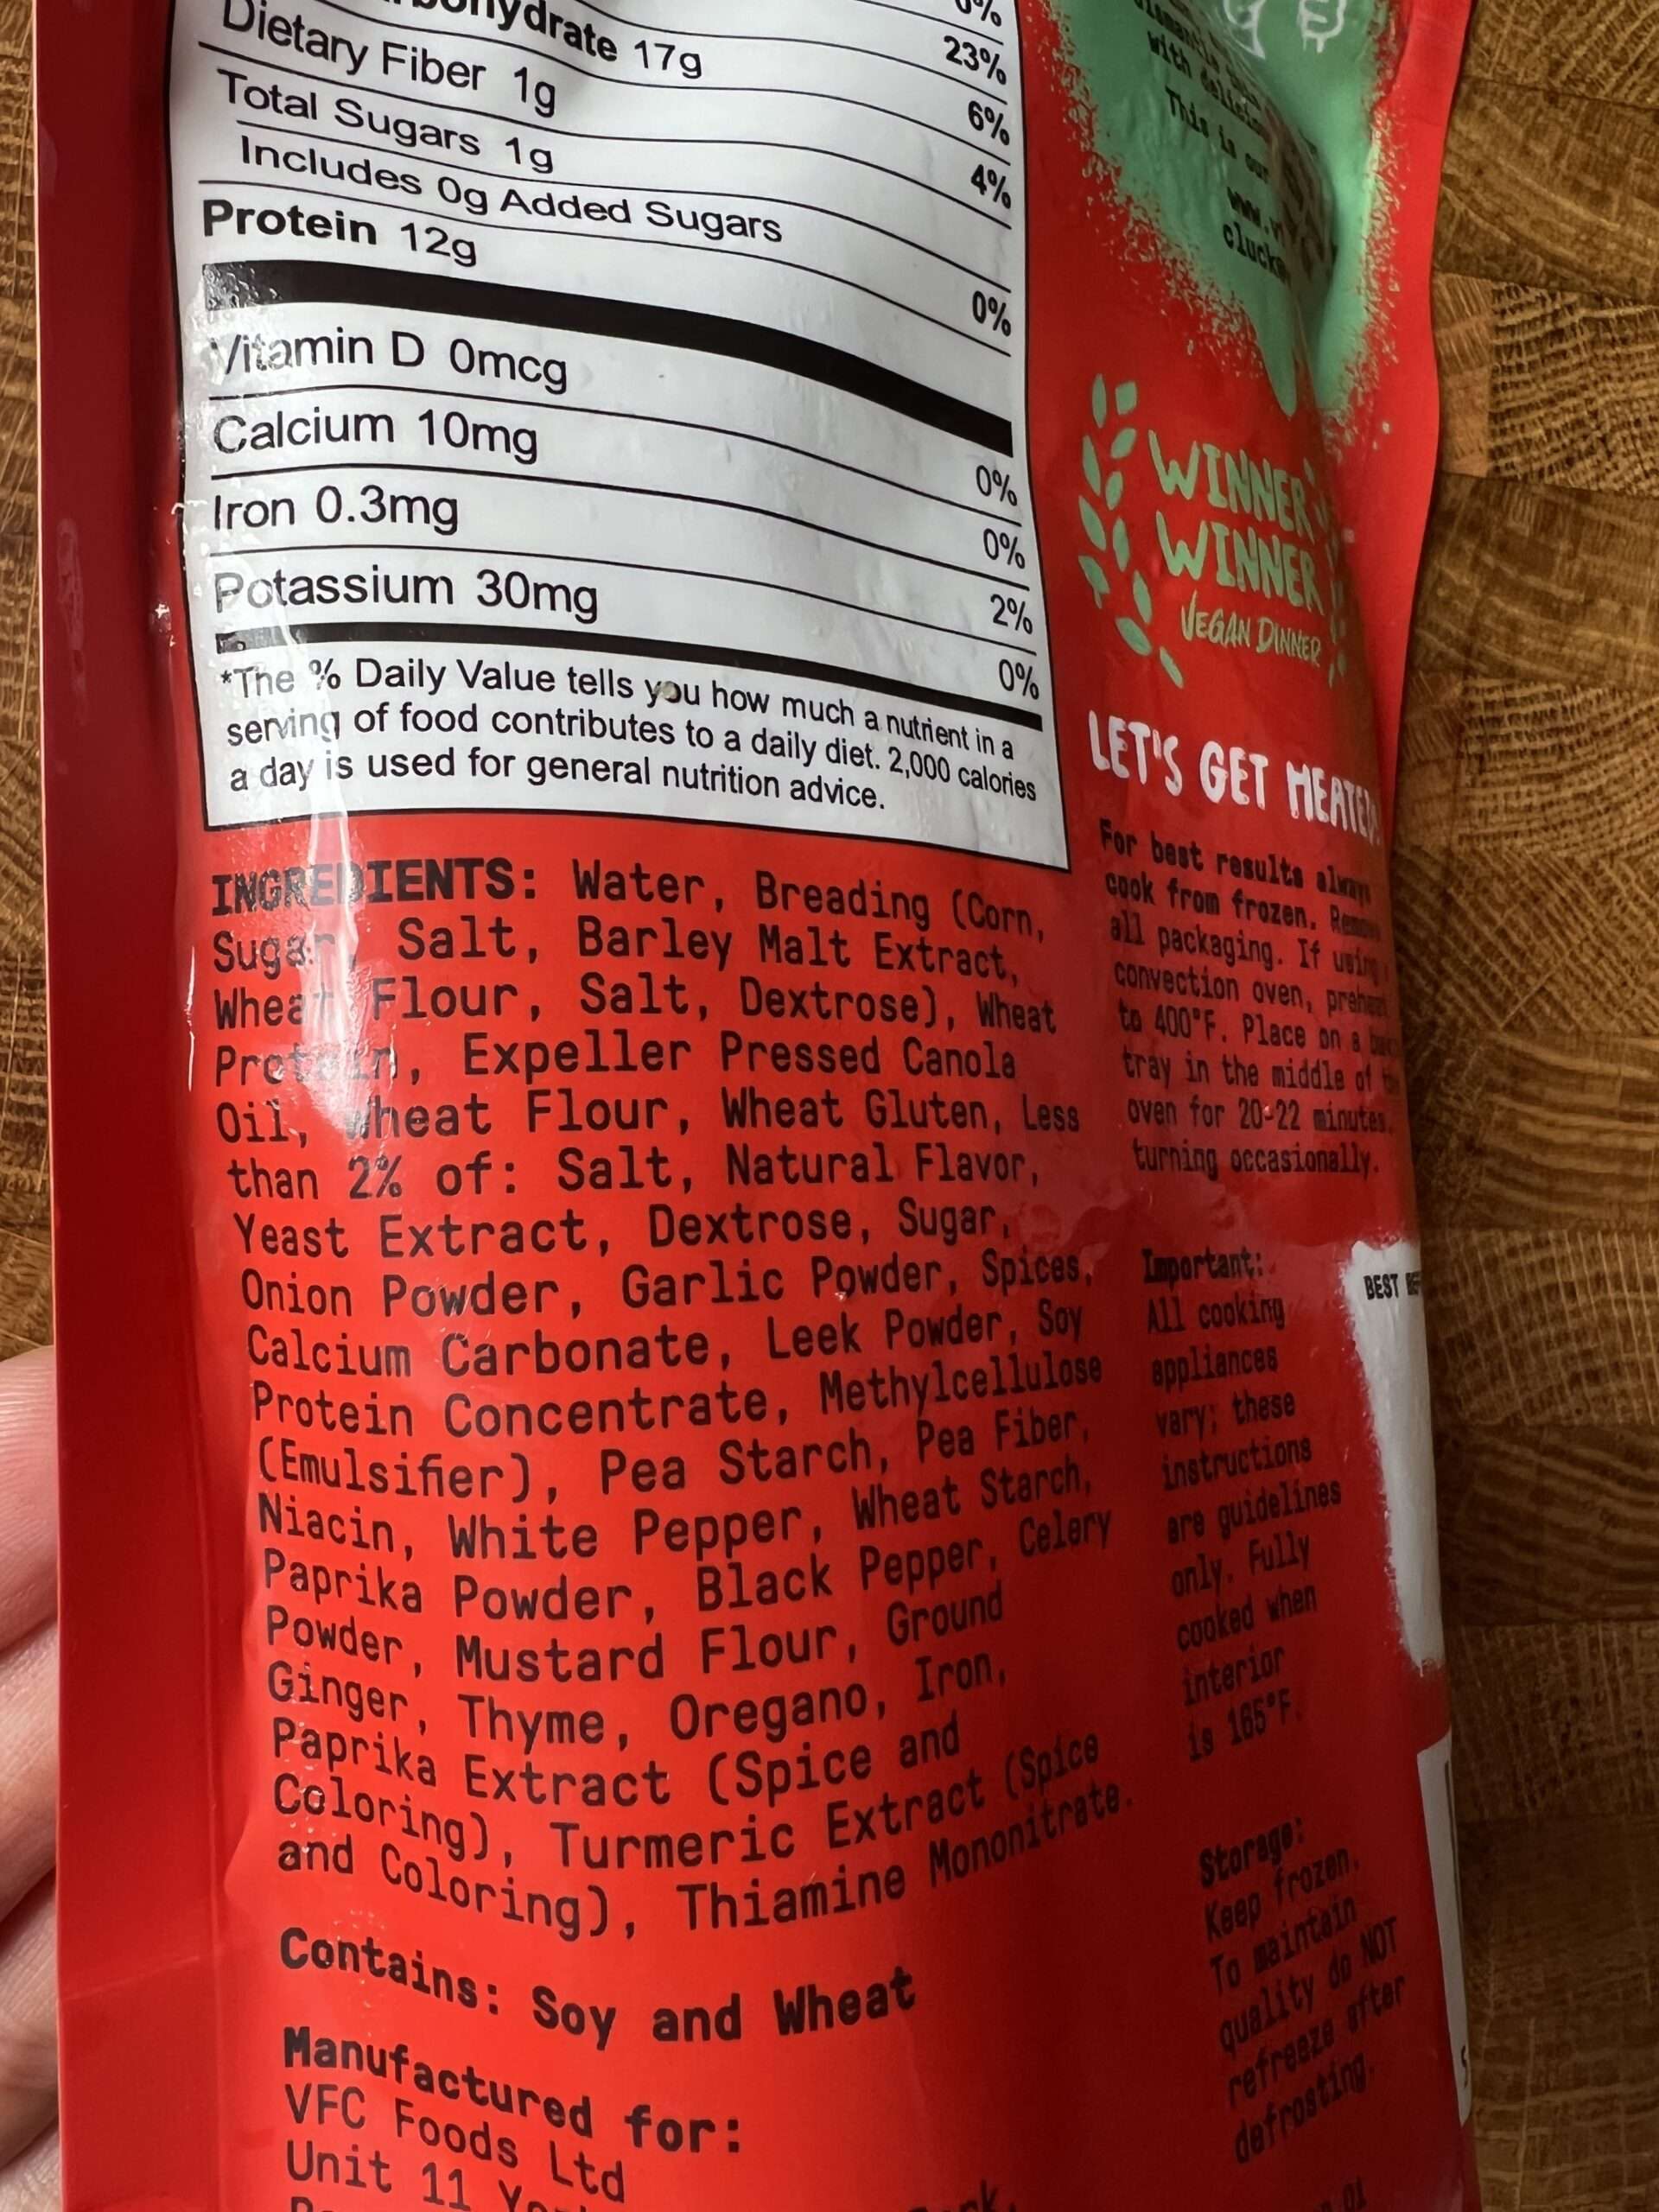 A bag of VFC Foods Vegan Chicken Bites with nutritional facts.